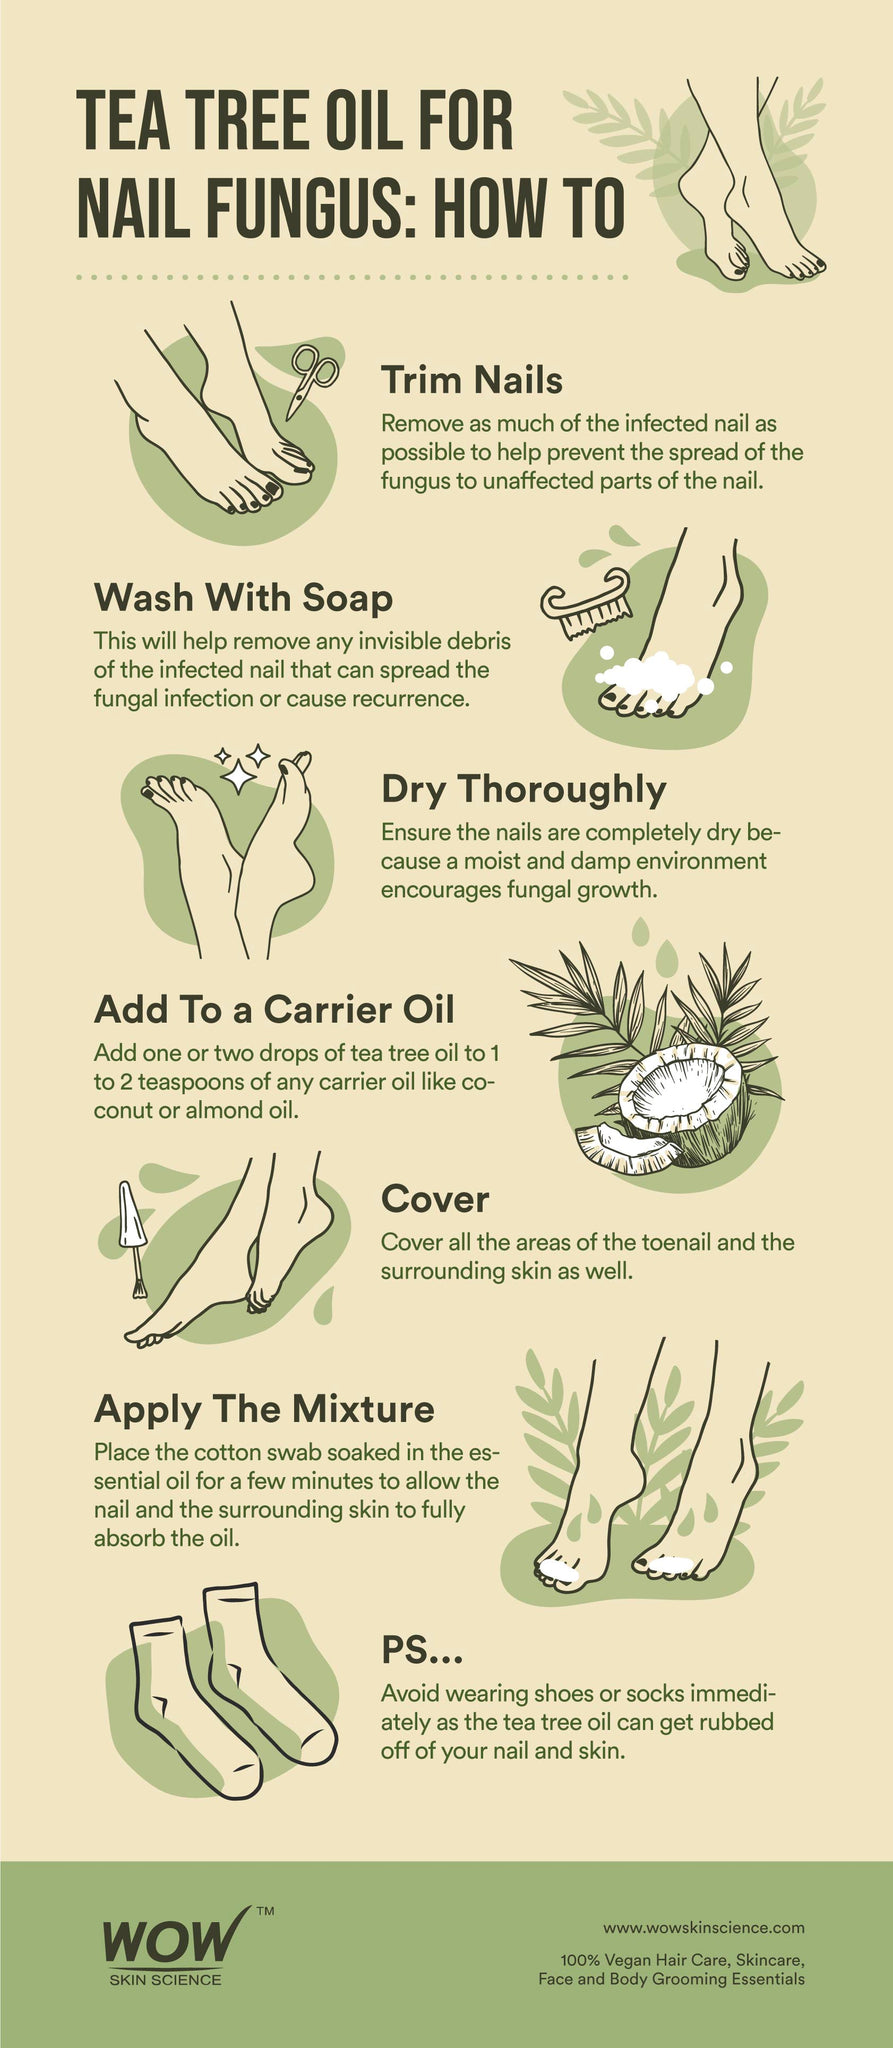 A quick guide to using tea tree oil for nail fungus